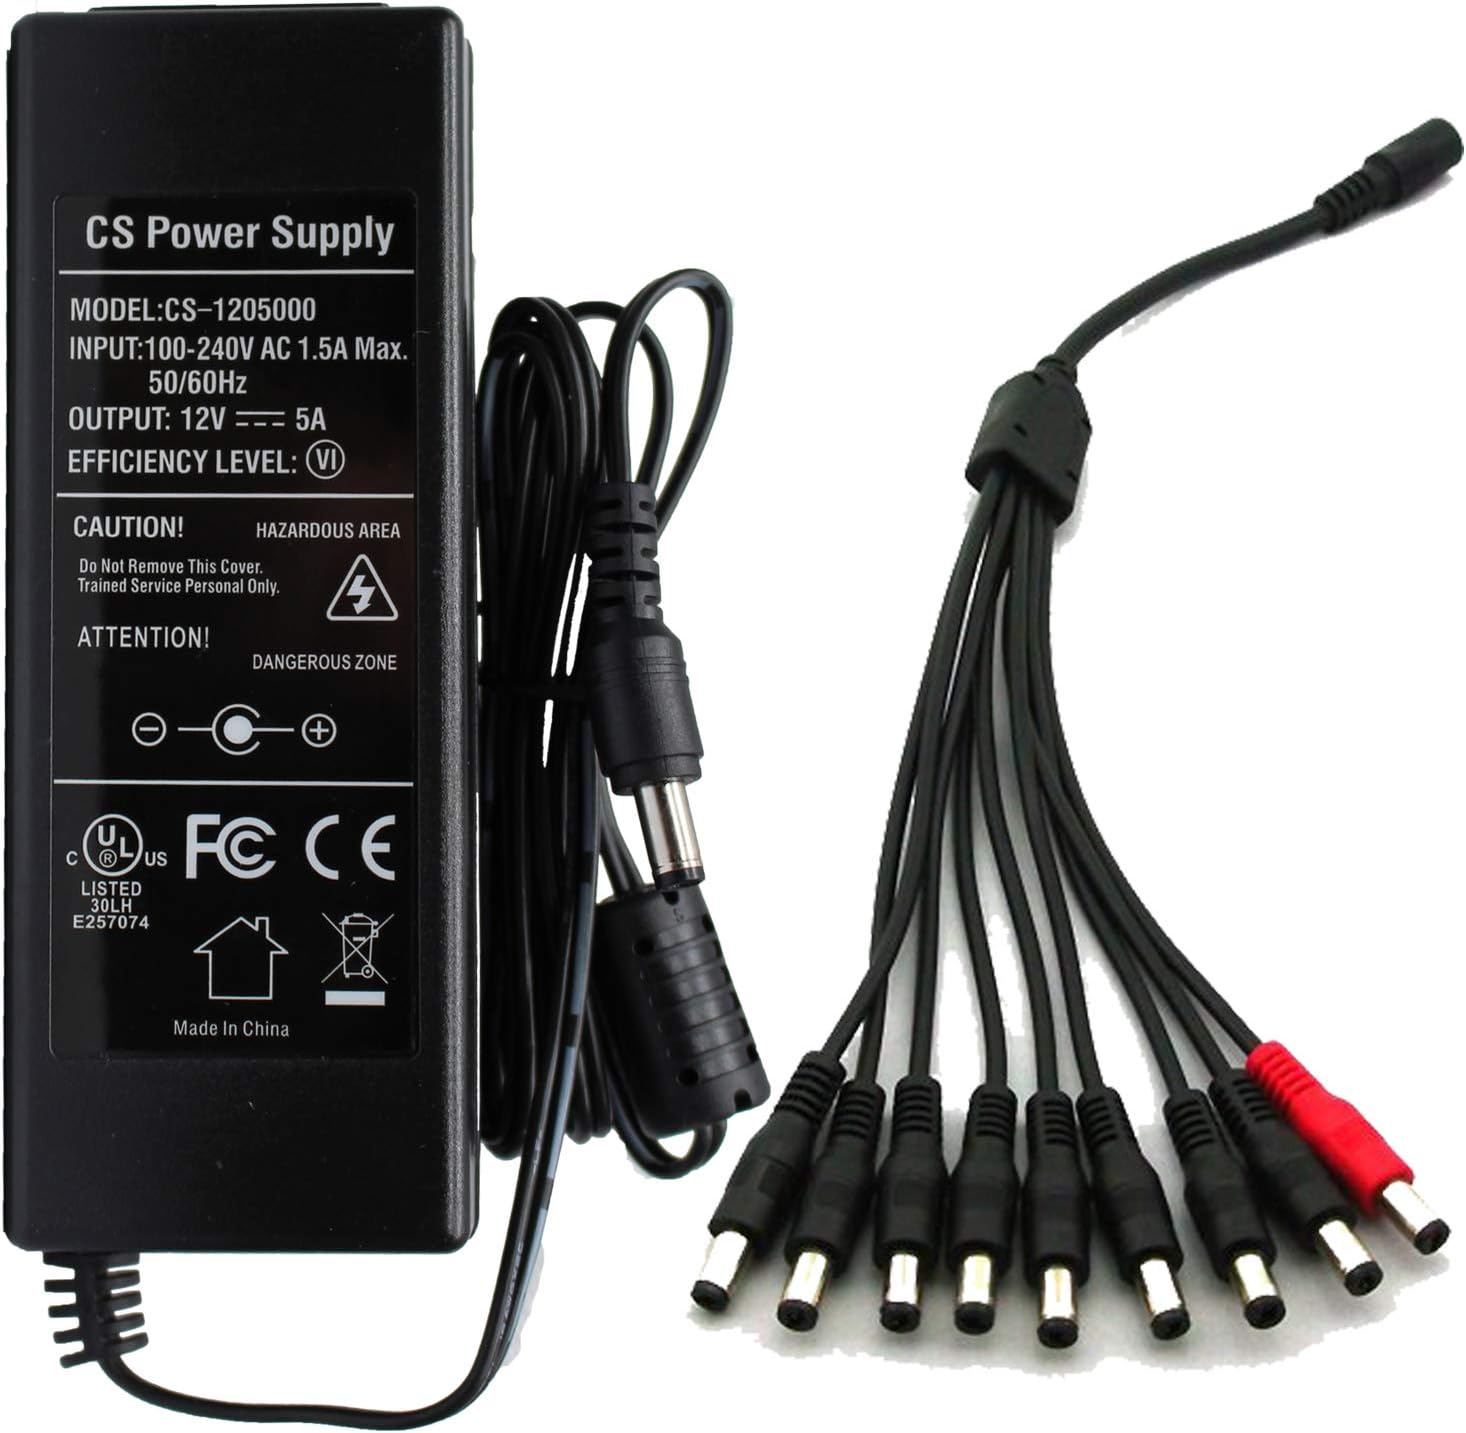 AC to DC 12V 5A Power Supply Adapter with 9 Way Splitter Cable, Plug 5.5 x 2.1mm for Led Light Strips, NVR DVR Security